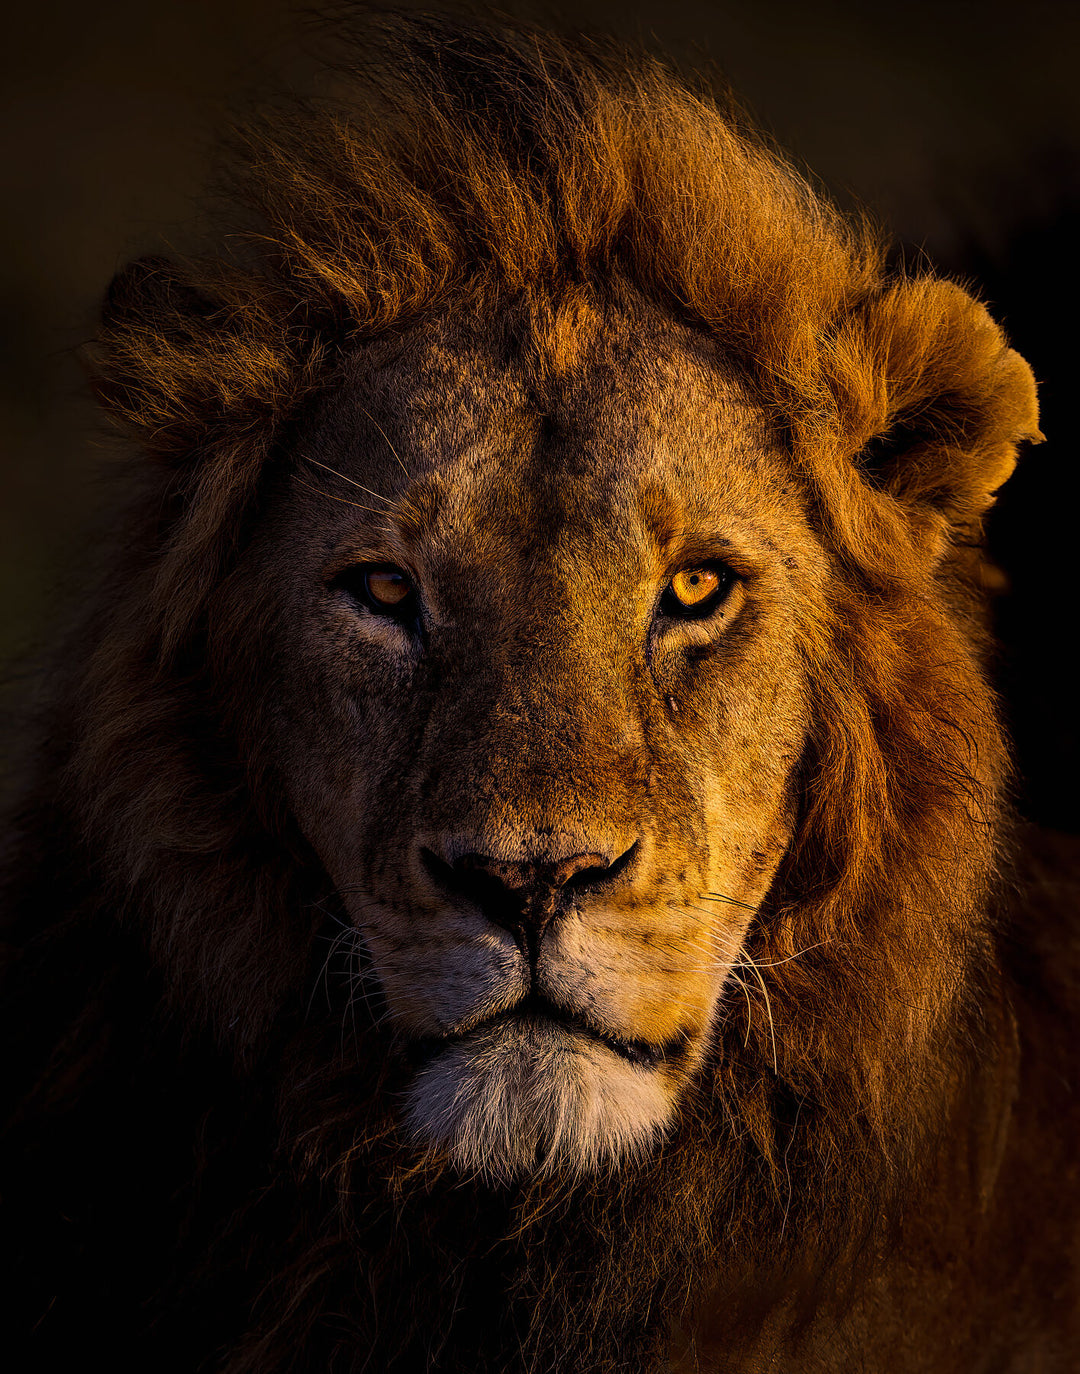 At sunrise, Naboisho's lion pride leader stands resolute, half-lit by dawn's rays. A framed fine art photograph captures the wild essence of Africa, embodying the guardianship of these magnificent creatures. By Thomas Nicholson